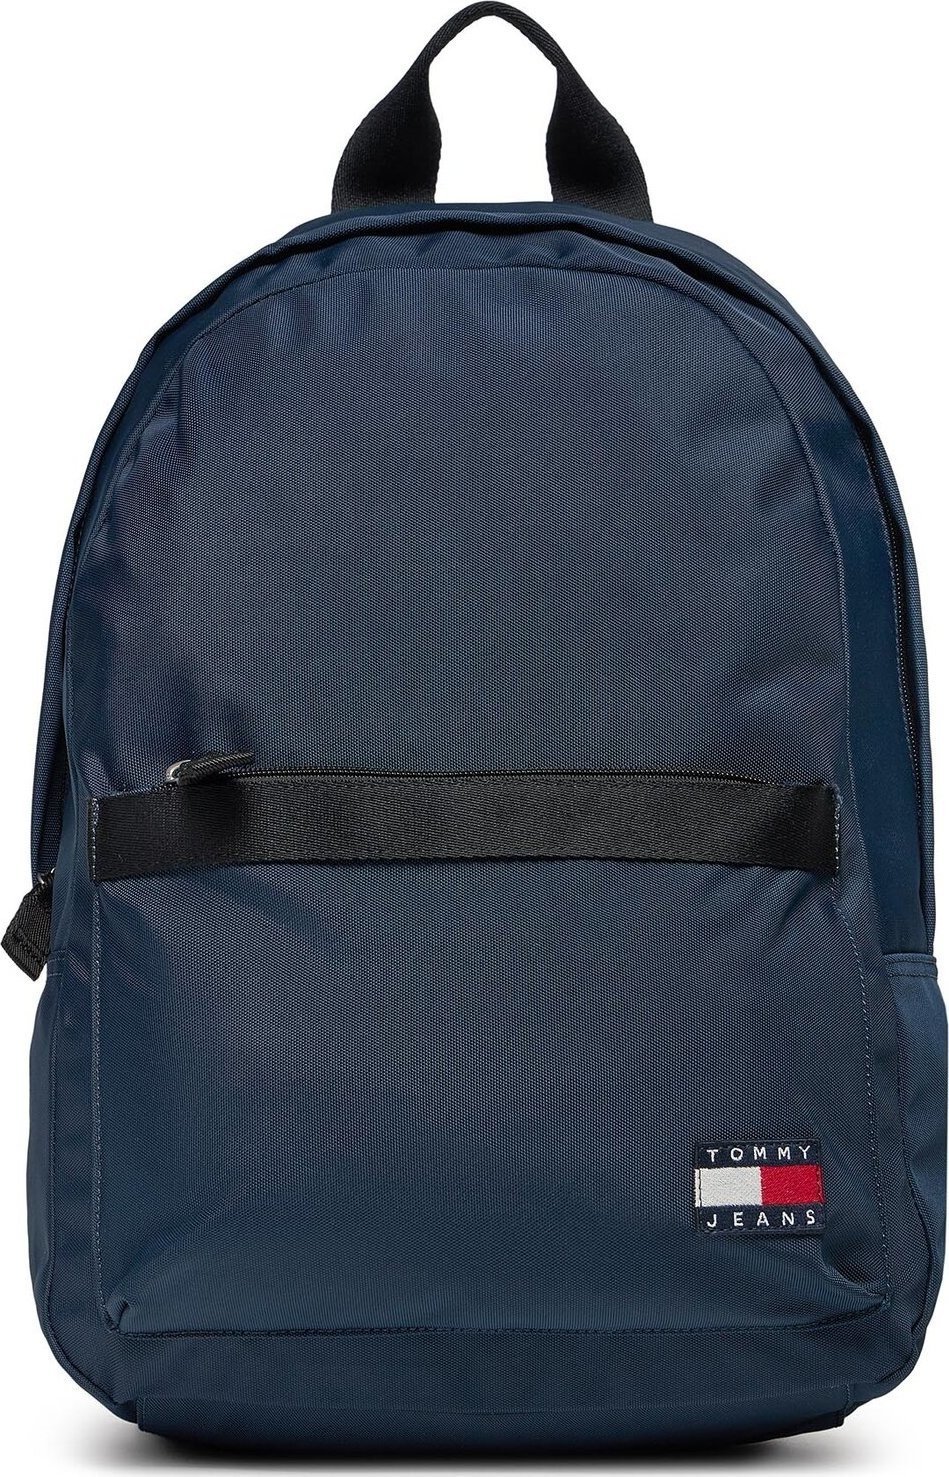 Batoh Tommy Jeans Tjm Daily Dome Backpack AM0AM11964 Dark Night Navy C1G